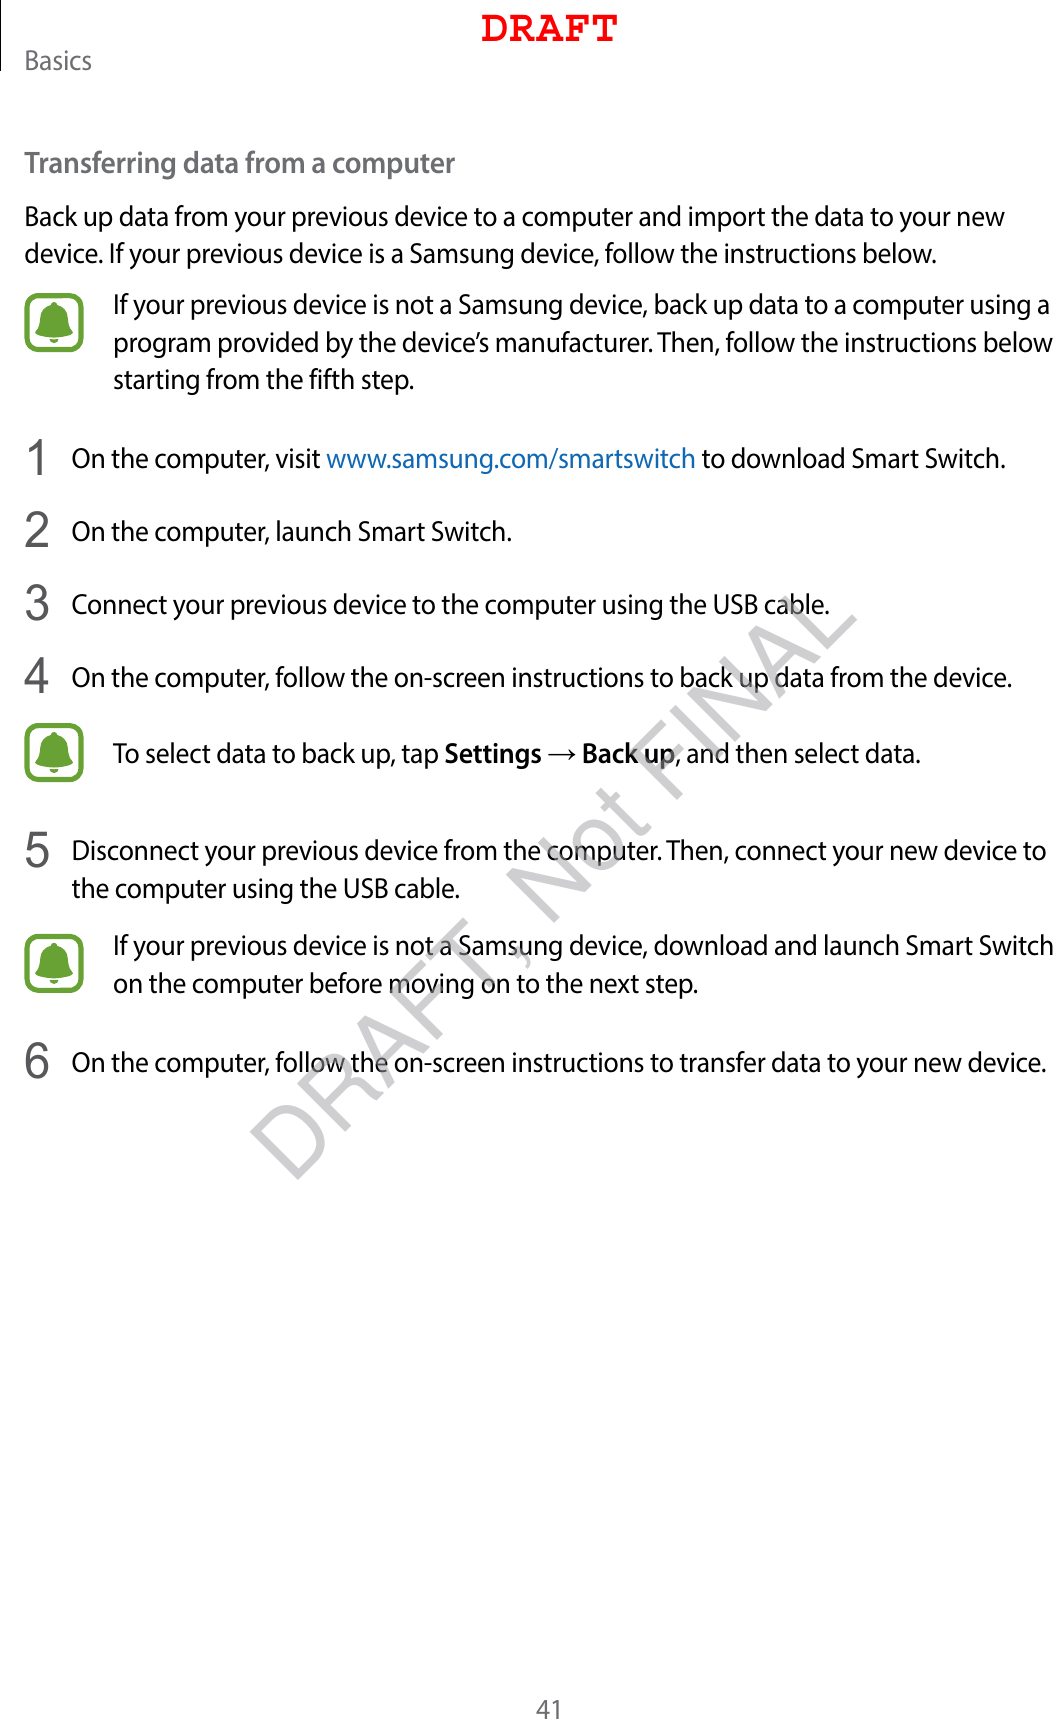 Basics41Transferring data from a computerBack up data from your previous device to a computer and import the data to your new device. If your previous device is a Samsung device, follow the instructions below.If your previous device is not a Samsung device, back up data to a computer using a program provided by the device’s manufacturer. Then, follow the instructions below starting from the fifth step.1  On the computer, visit www.samsung.com/smartswitch to download Smart Switch.2  On the computer, launch Smart Switch.3  Connect your previous device to the computer using the USB cable.4  On the computer, follow the on-screen instructions to back up data from the device.To select data to back up, tap Settings → Back up, and then select data.5  Disconnect your previous device from the computer. Then, connect your new device to the computer using the USB cable.If your previous device is not a Samsung device, download and launch Smart Switch on the computer before moving on to the next step.6  On the computer, follow the on-screen instructions to transfer data to your new device.DRAFTDRAFT, Not FINAL